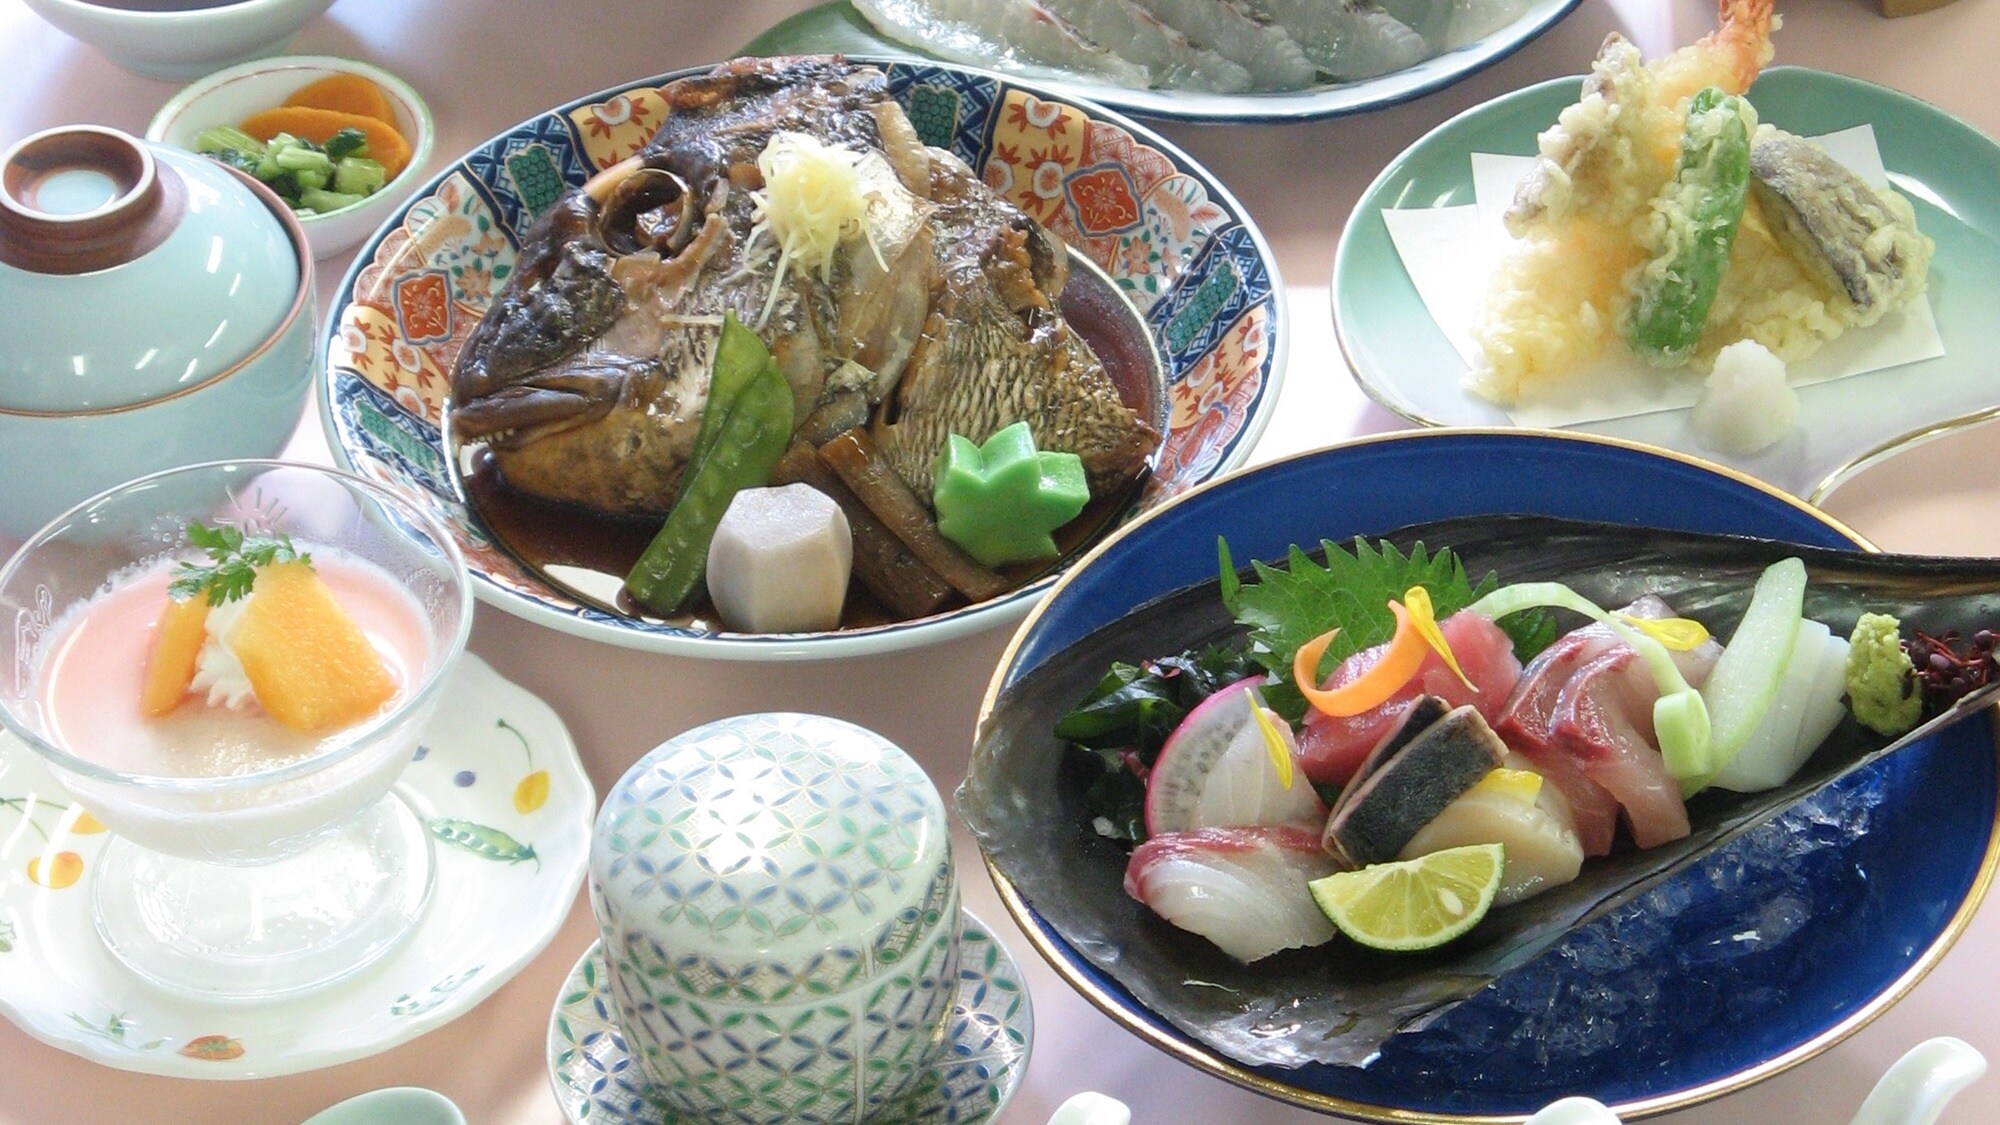 [Bamboo plan] and a "sea" course that uses plenty of seafood from Kaiyo Town, Tokushima